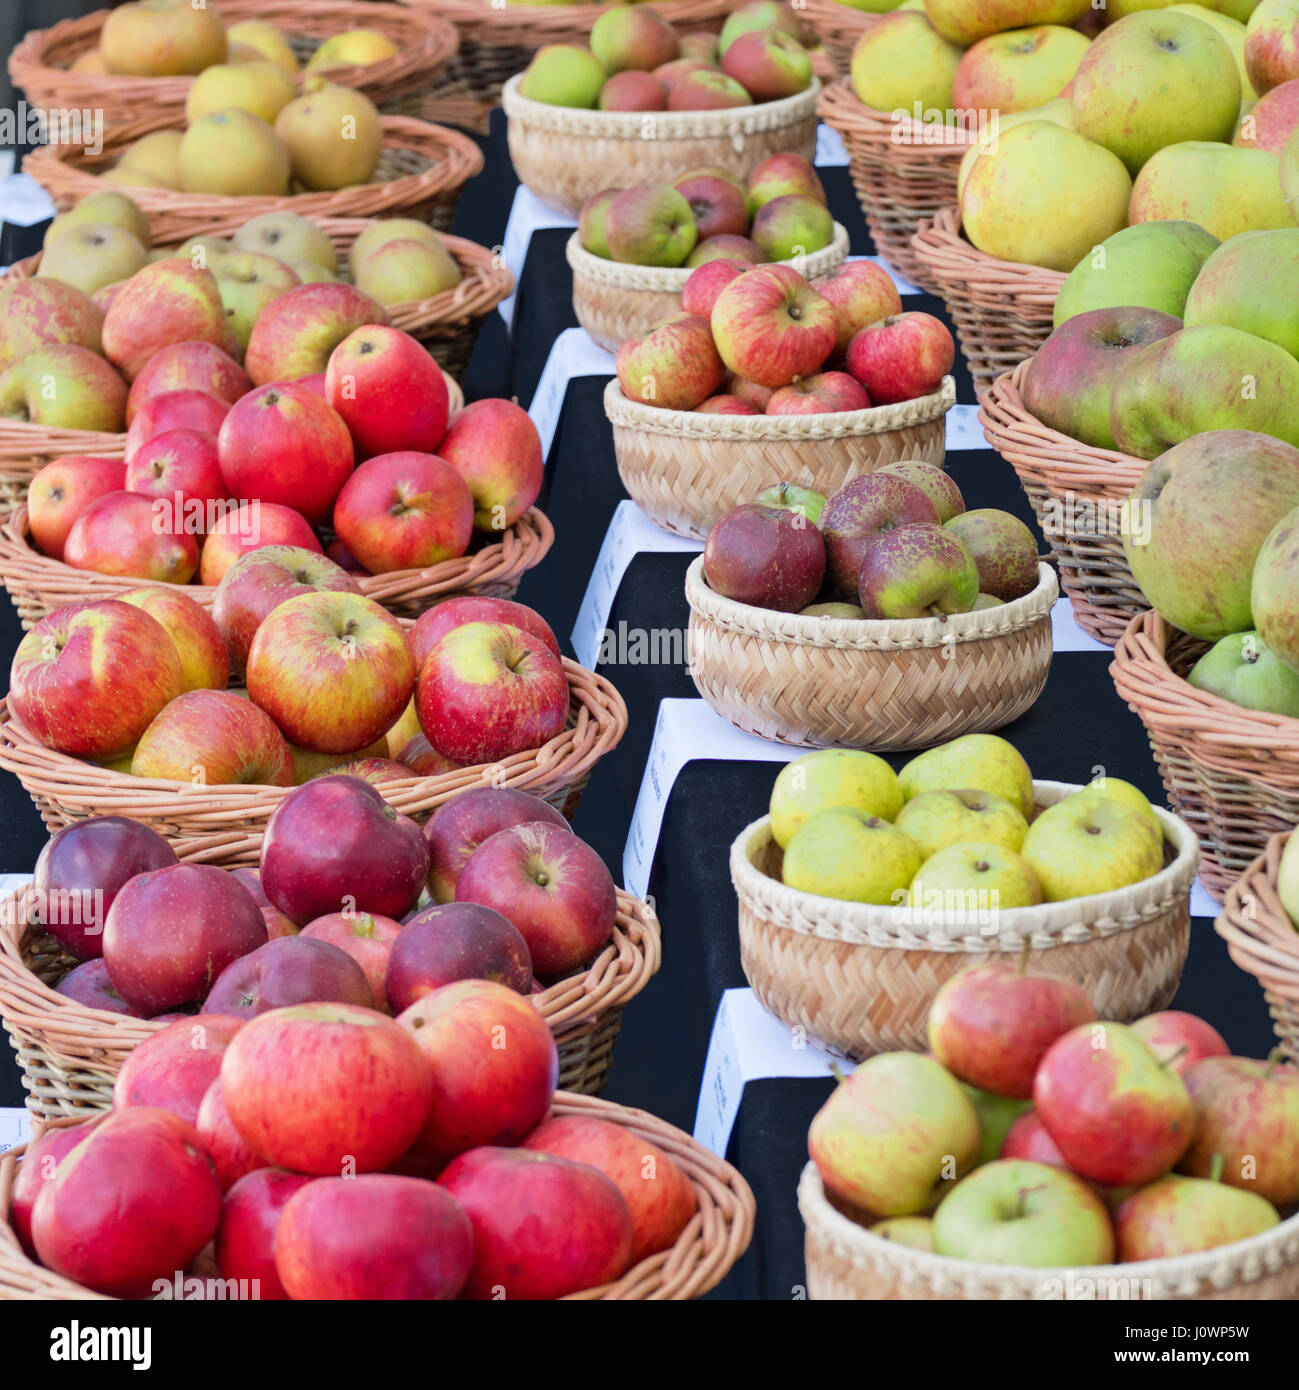 Different varieties of eating and cooking apples on display at an English autumn fair Stock Photo